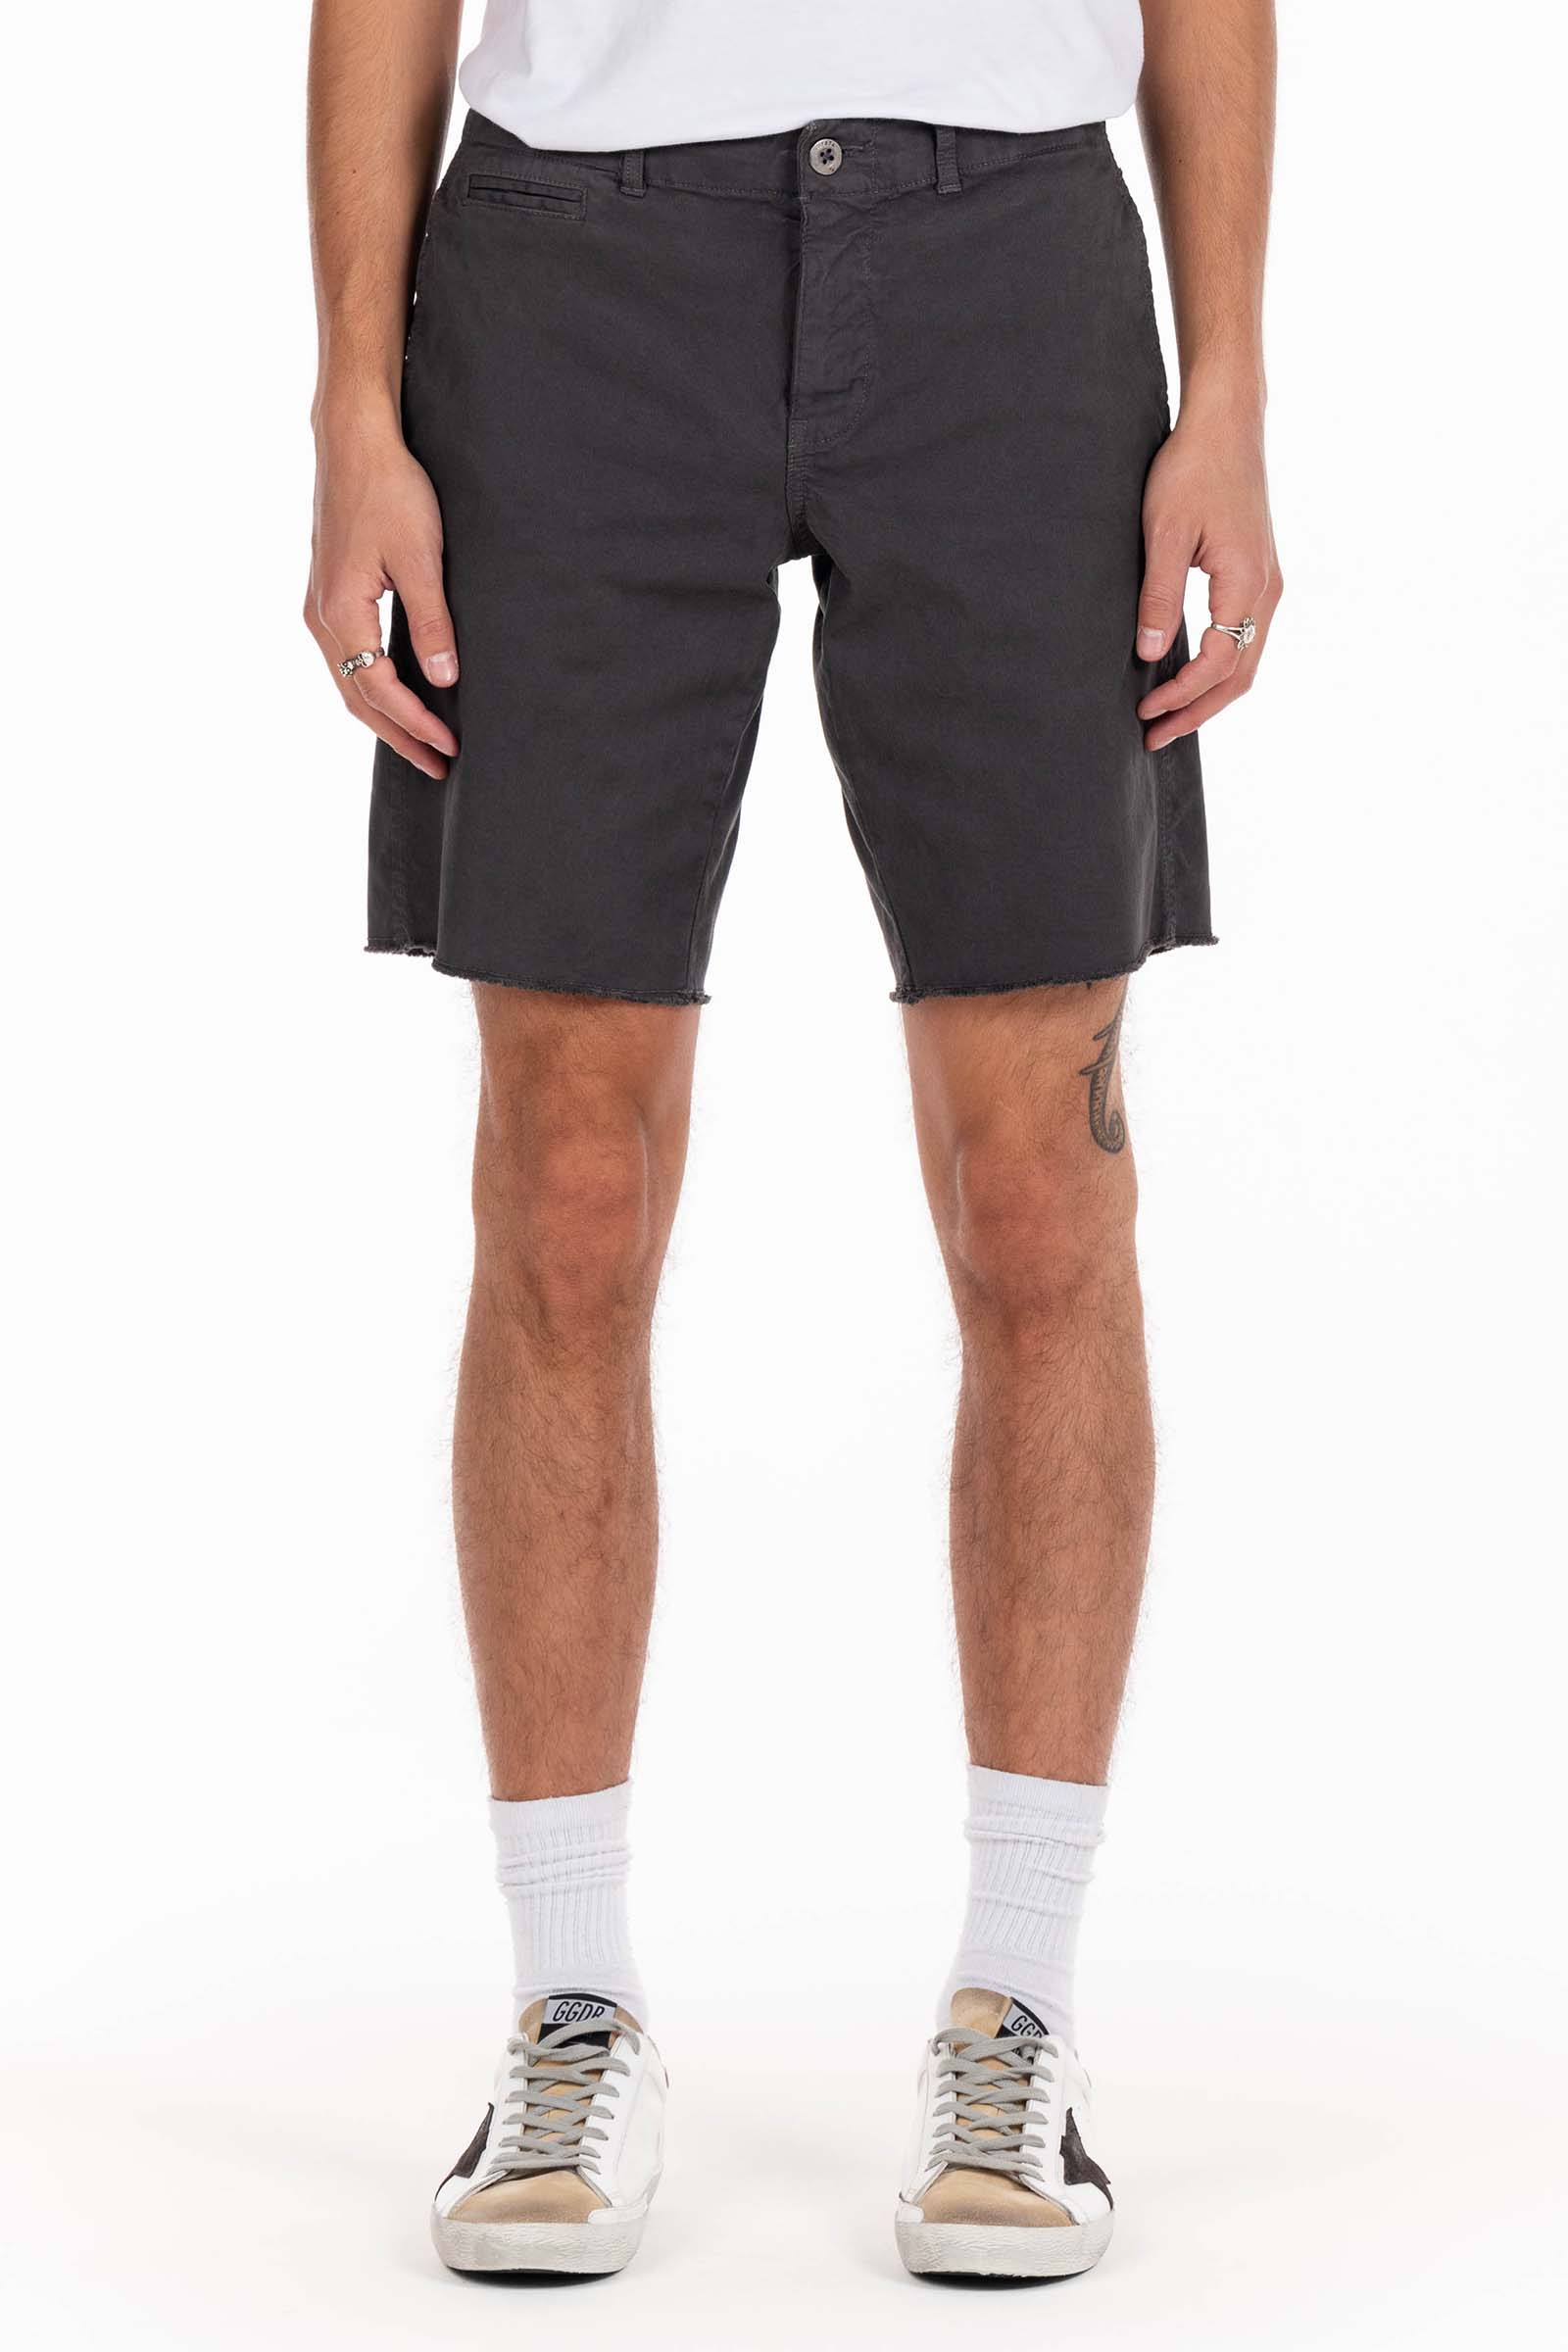 Original Paperbacks Rockland Chino Short in Vintage Black on Model Cropped Front View